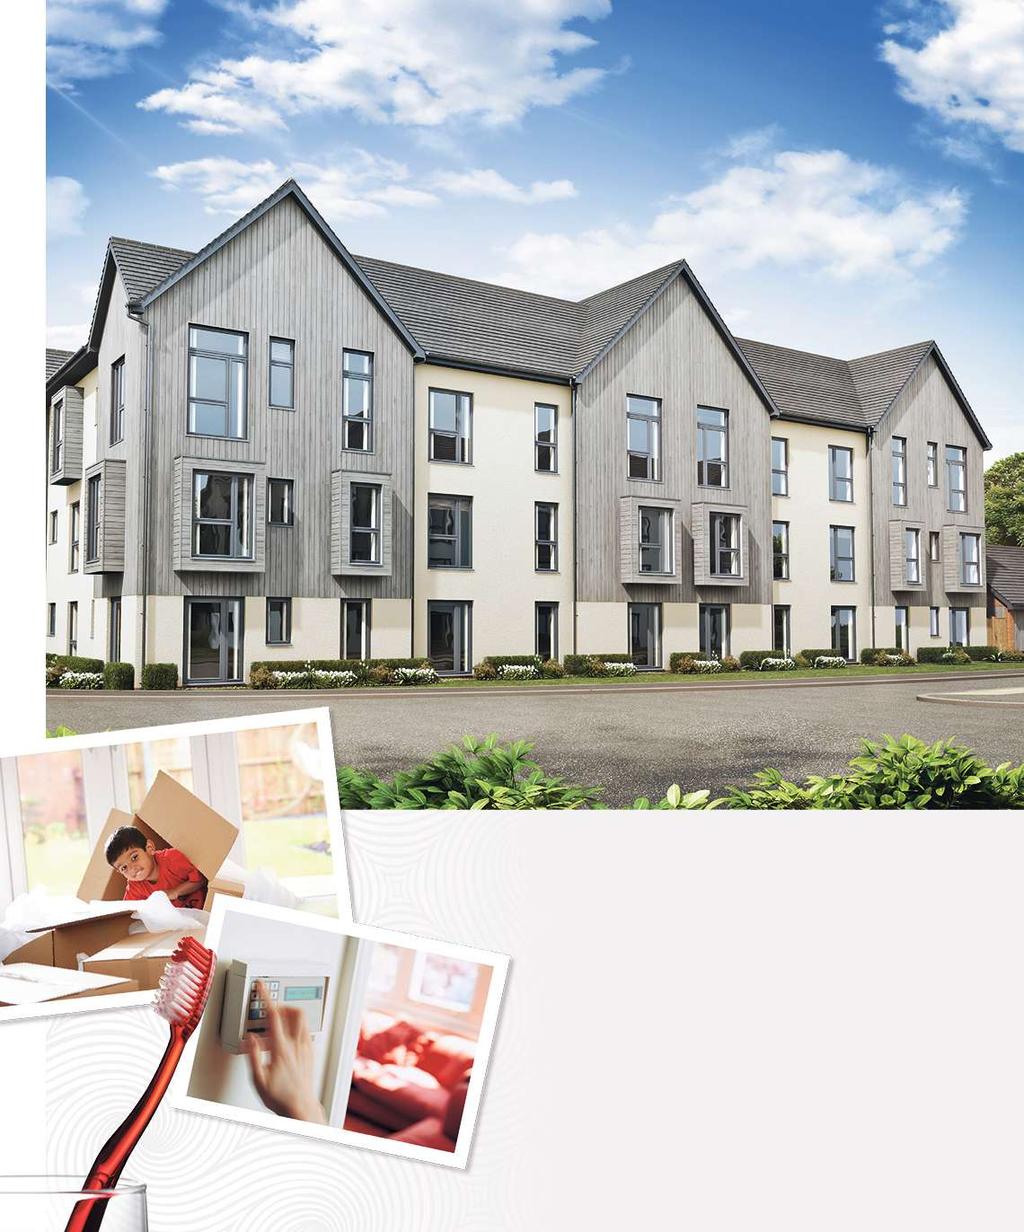 LATITUDE @ THE QUAYS est House 2 bedroom apartments This elegant 3 storey block features a selection of two bedroom apartments in a choice of different layouts.